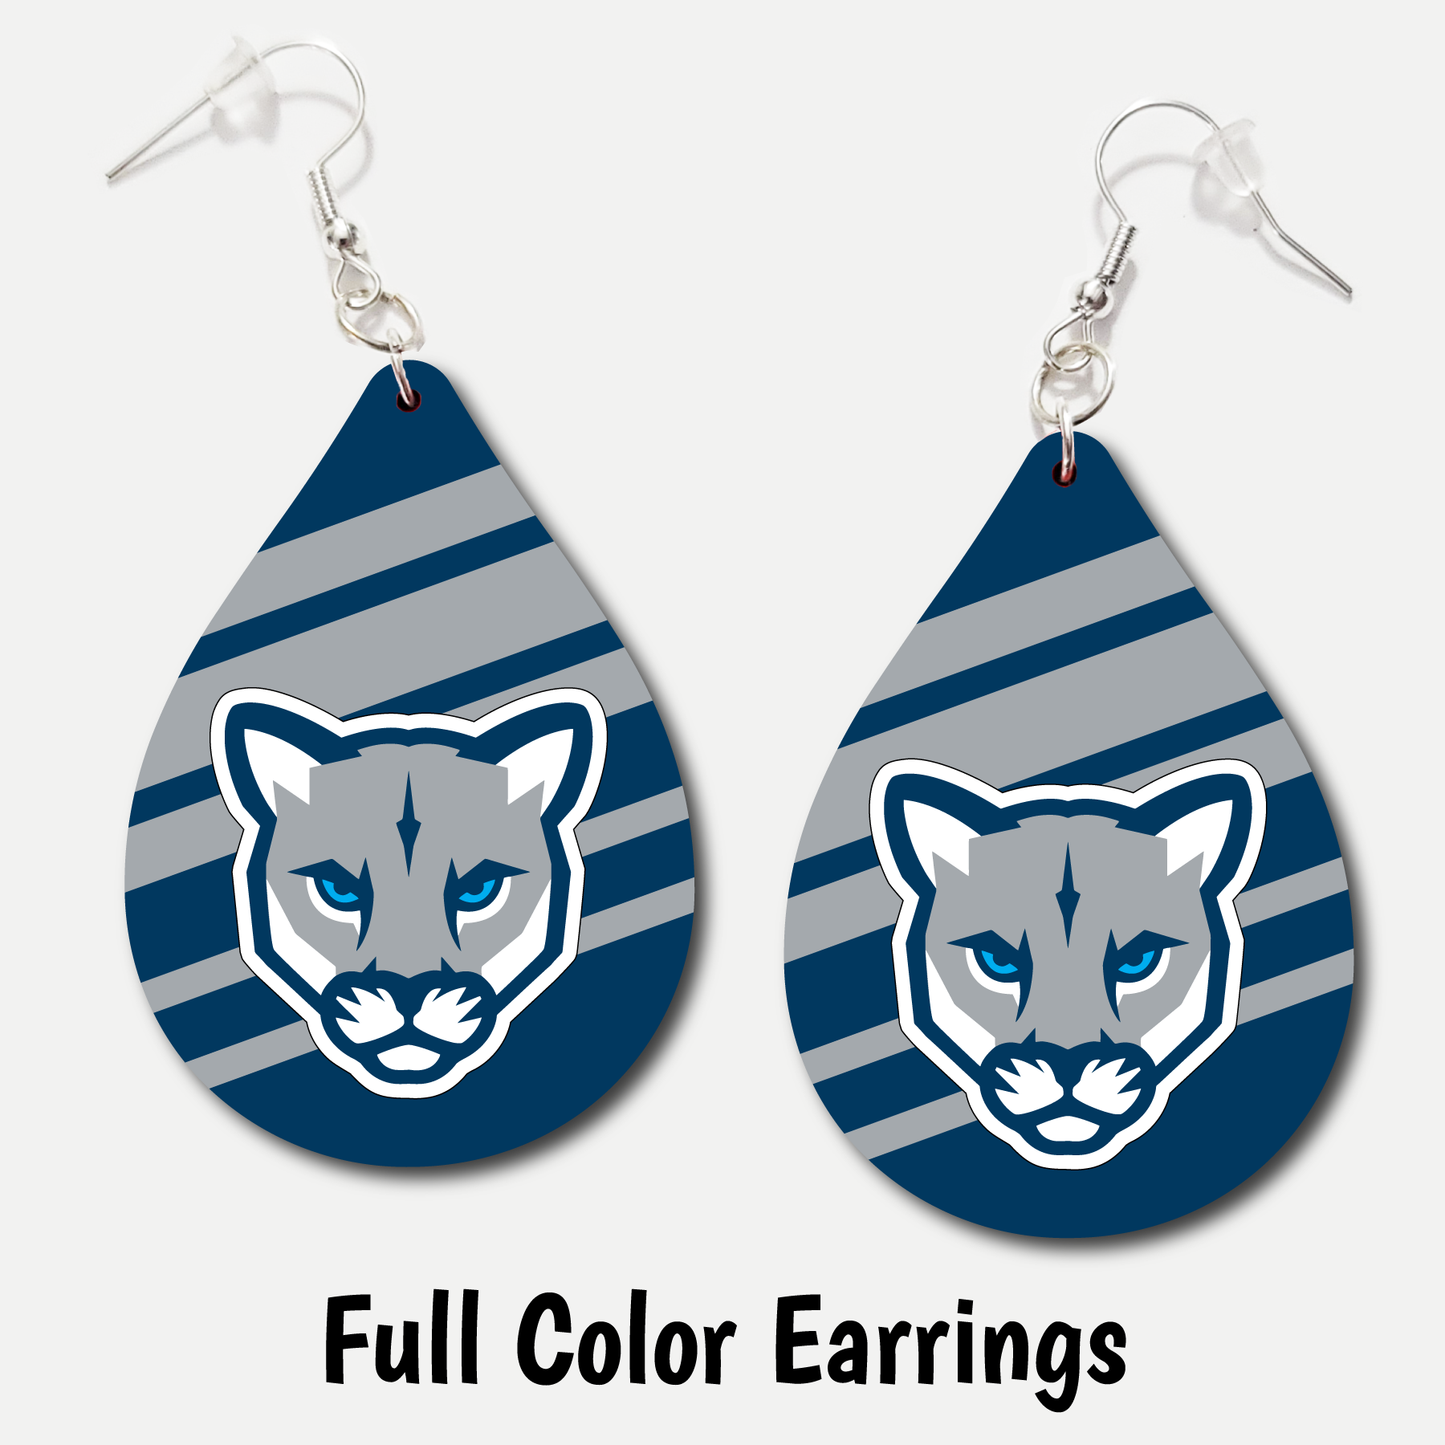 Firth Cougars - Full Color Earrings